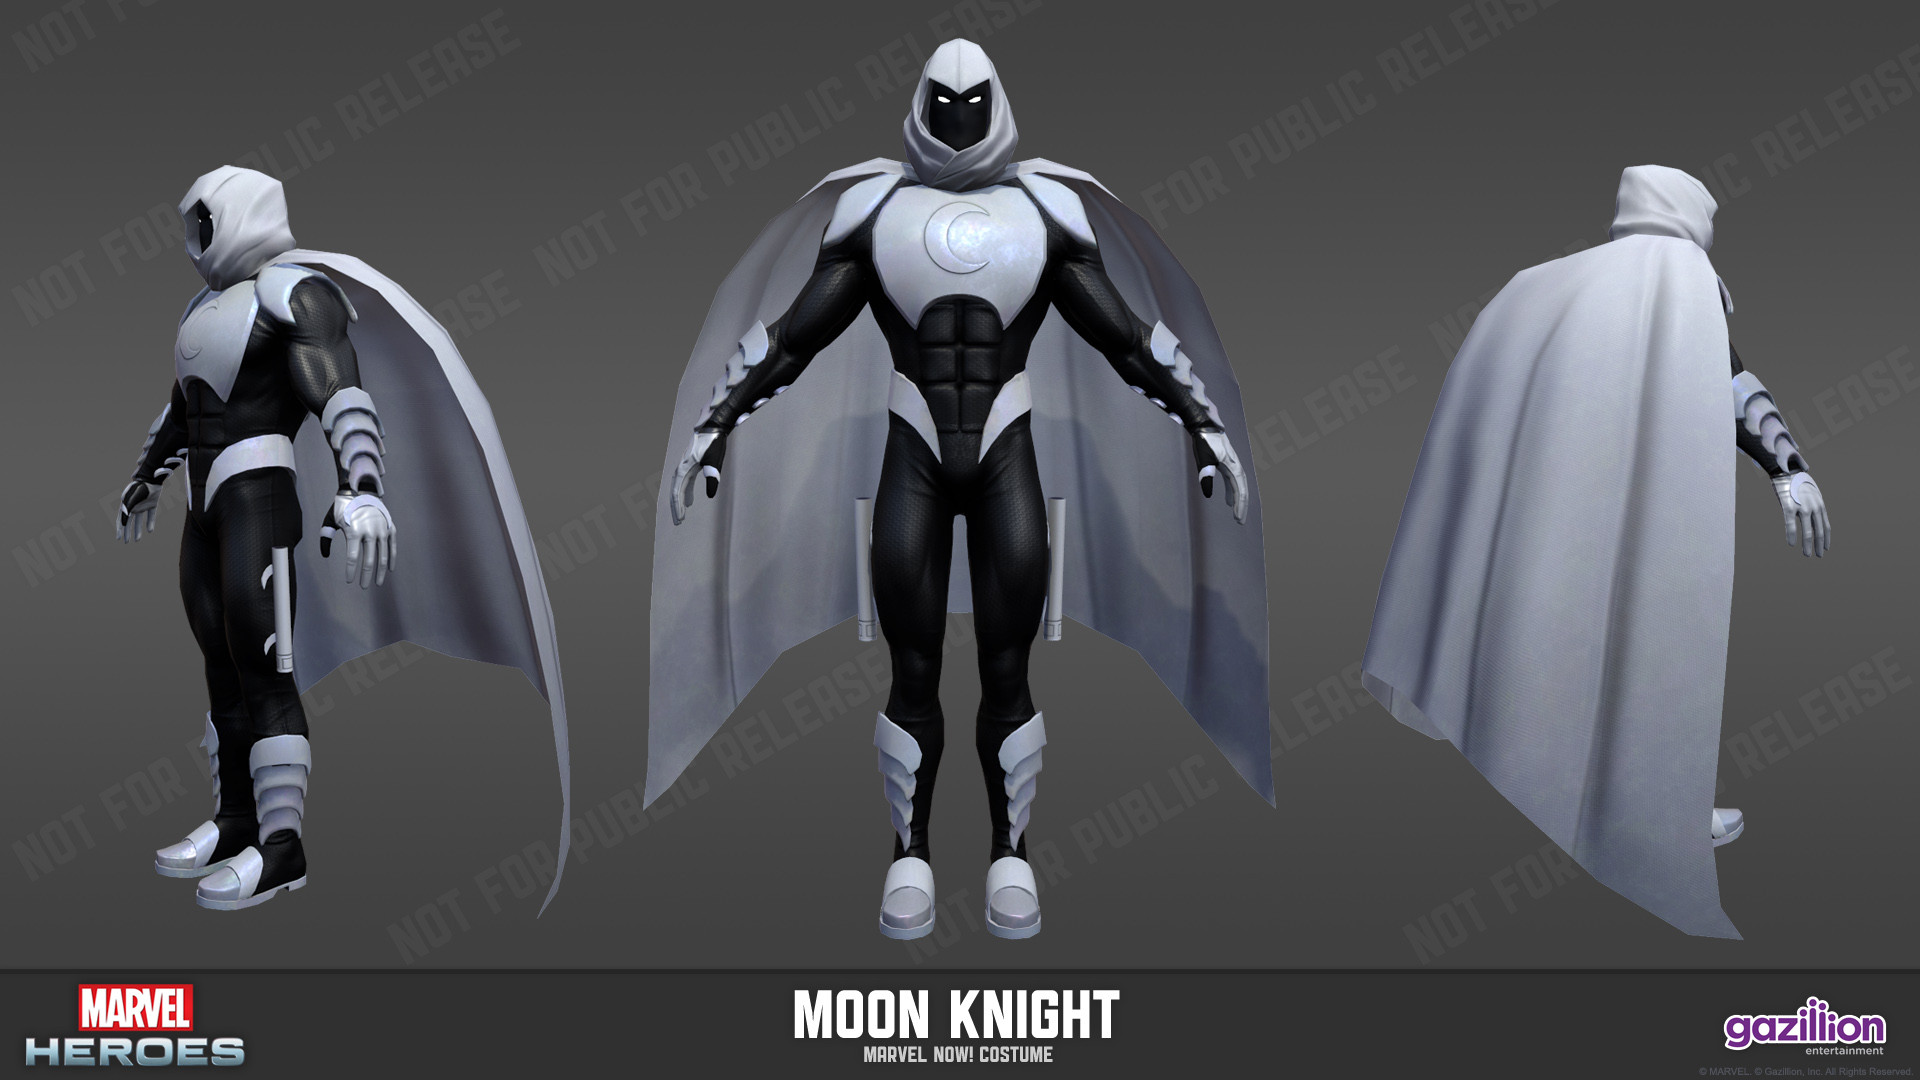 Marc Cosplay Costume from Moon Knight